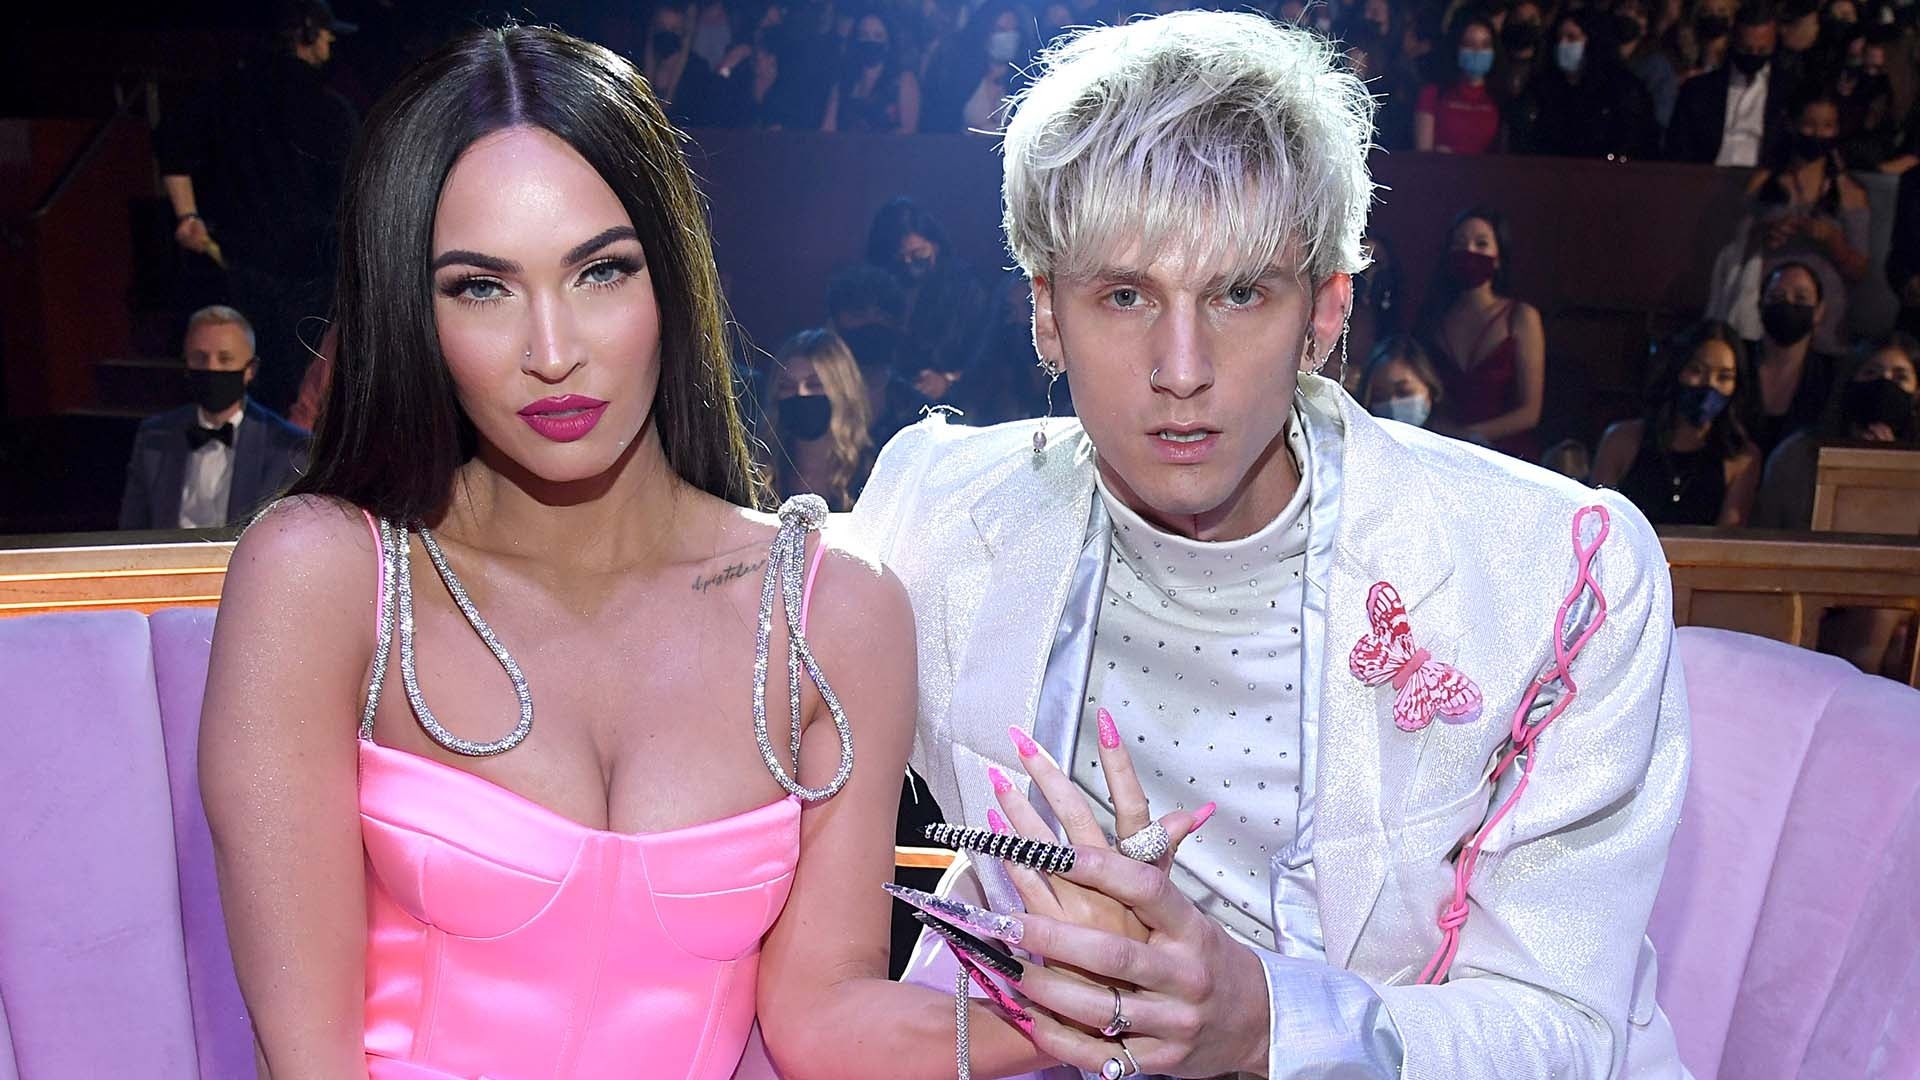 How Megan Fox and Machine Gun Kelly Saved Their Relationship (Source)